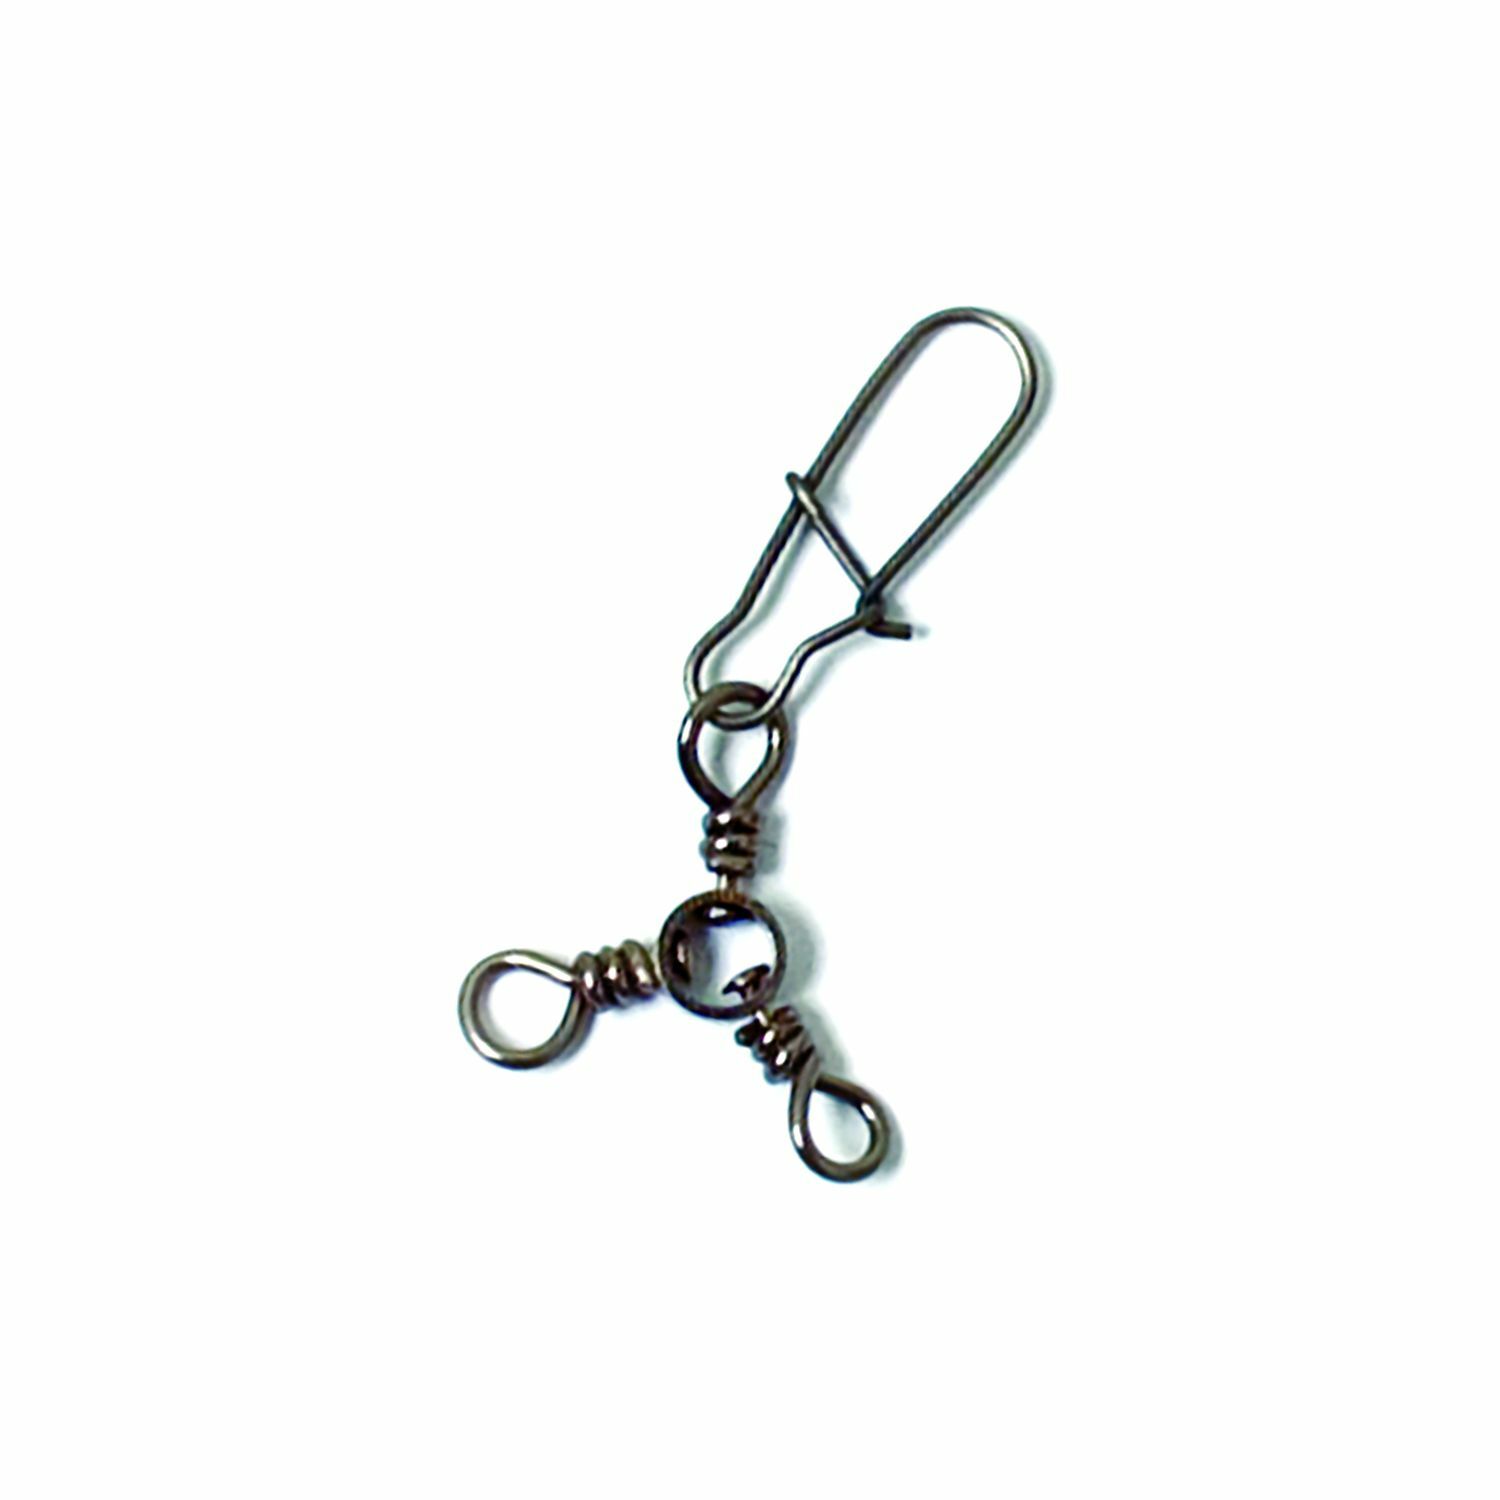 02161 3 Way Swivels with Dual Lock Snap